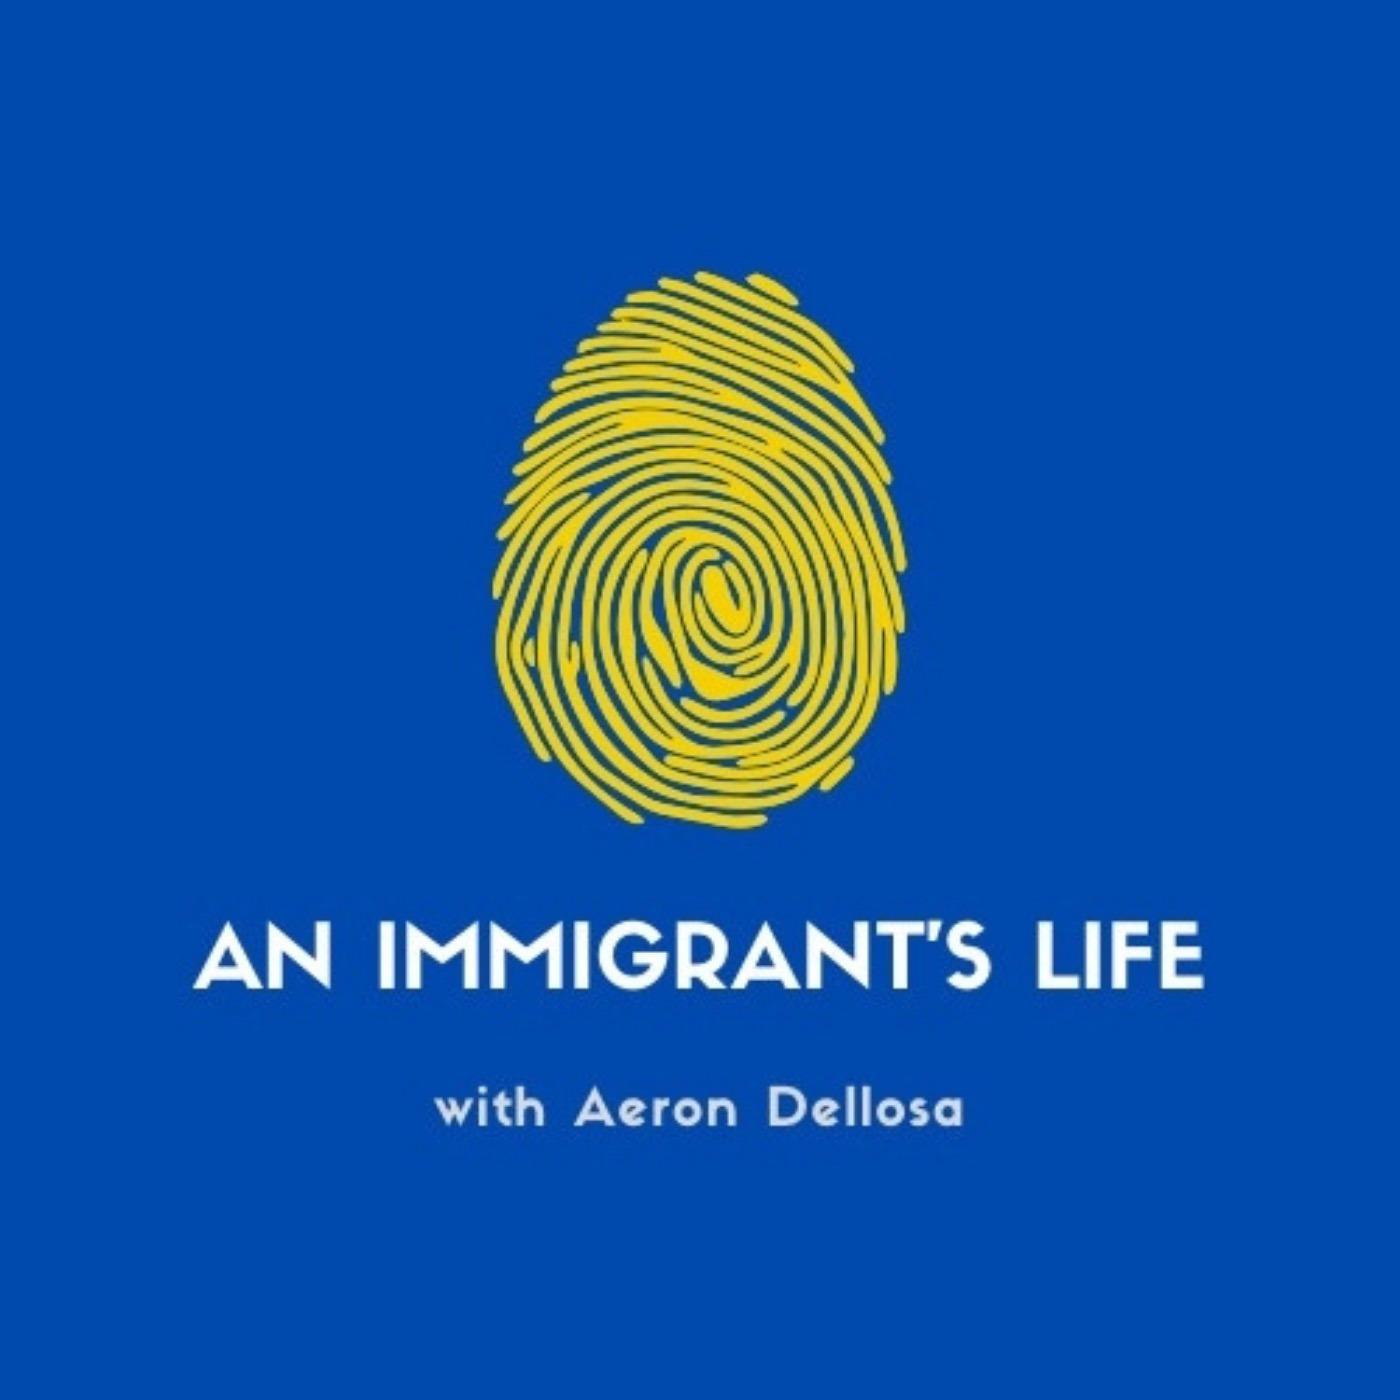 An Immigrant’s Life